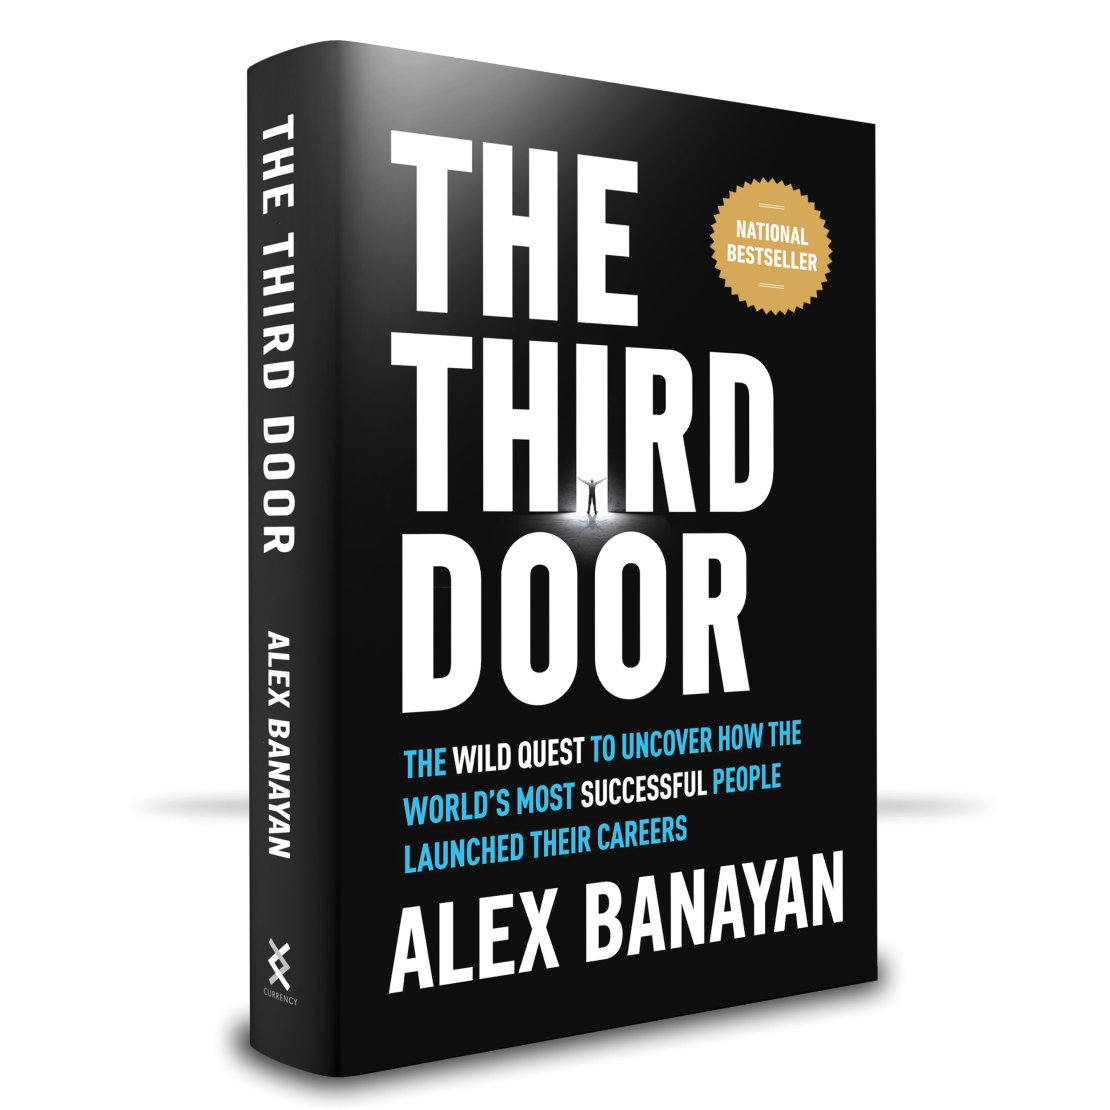 The Third Door Book Tour 2018: Events, Signings, Readings, and More